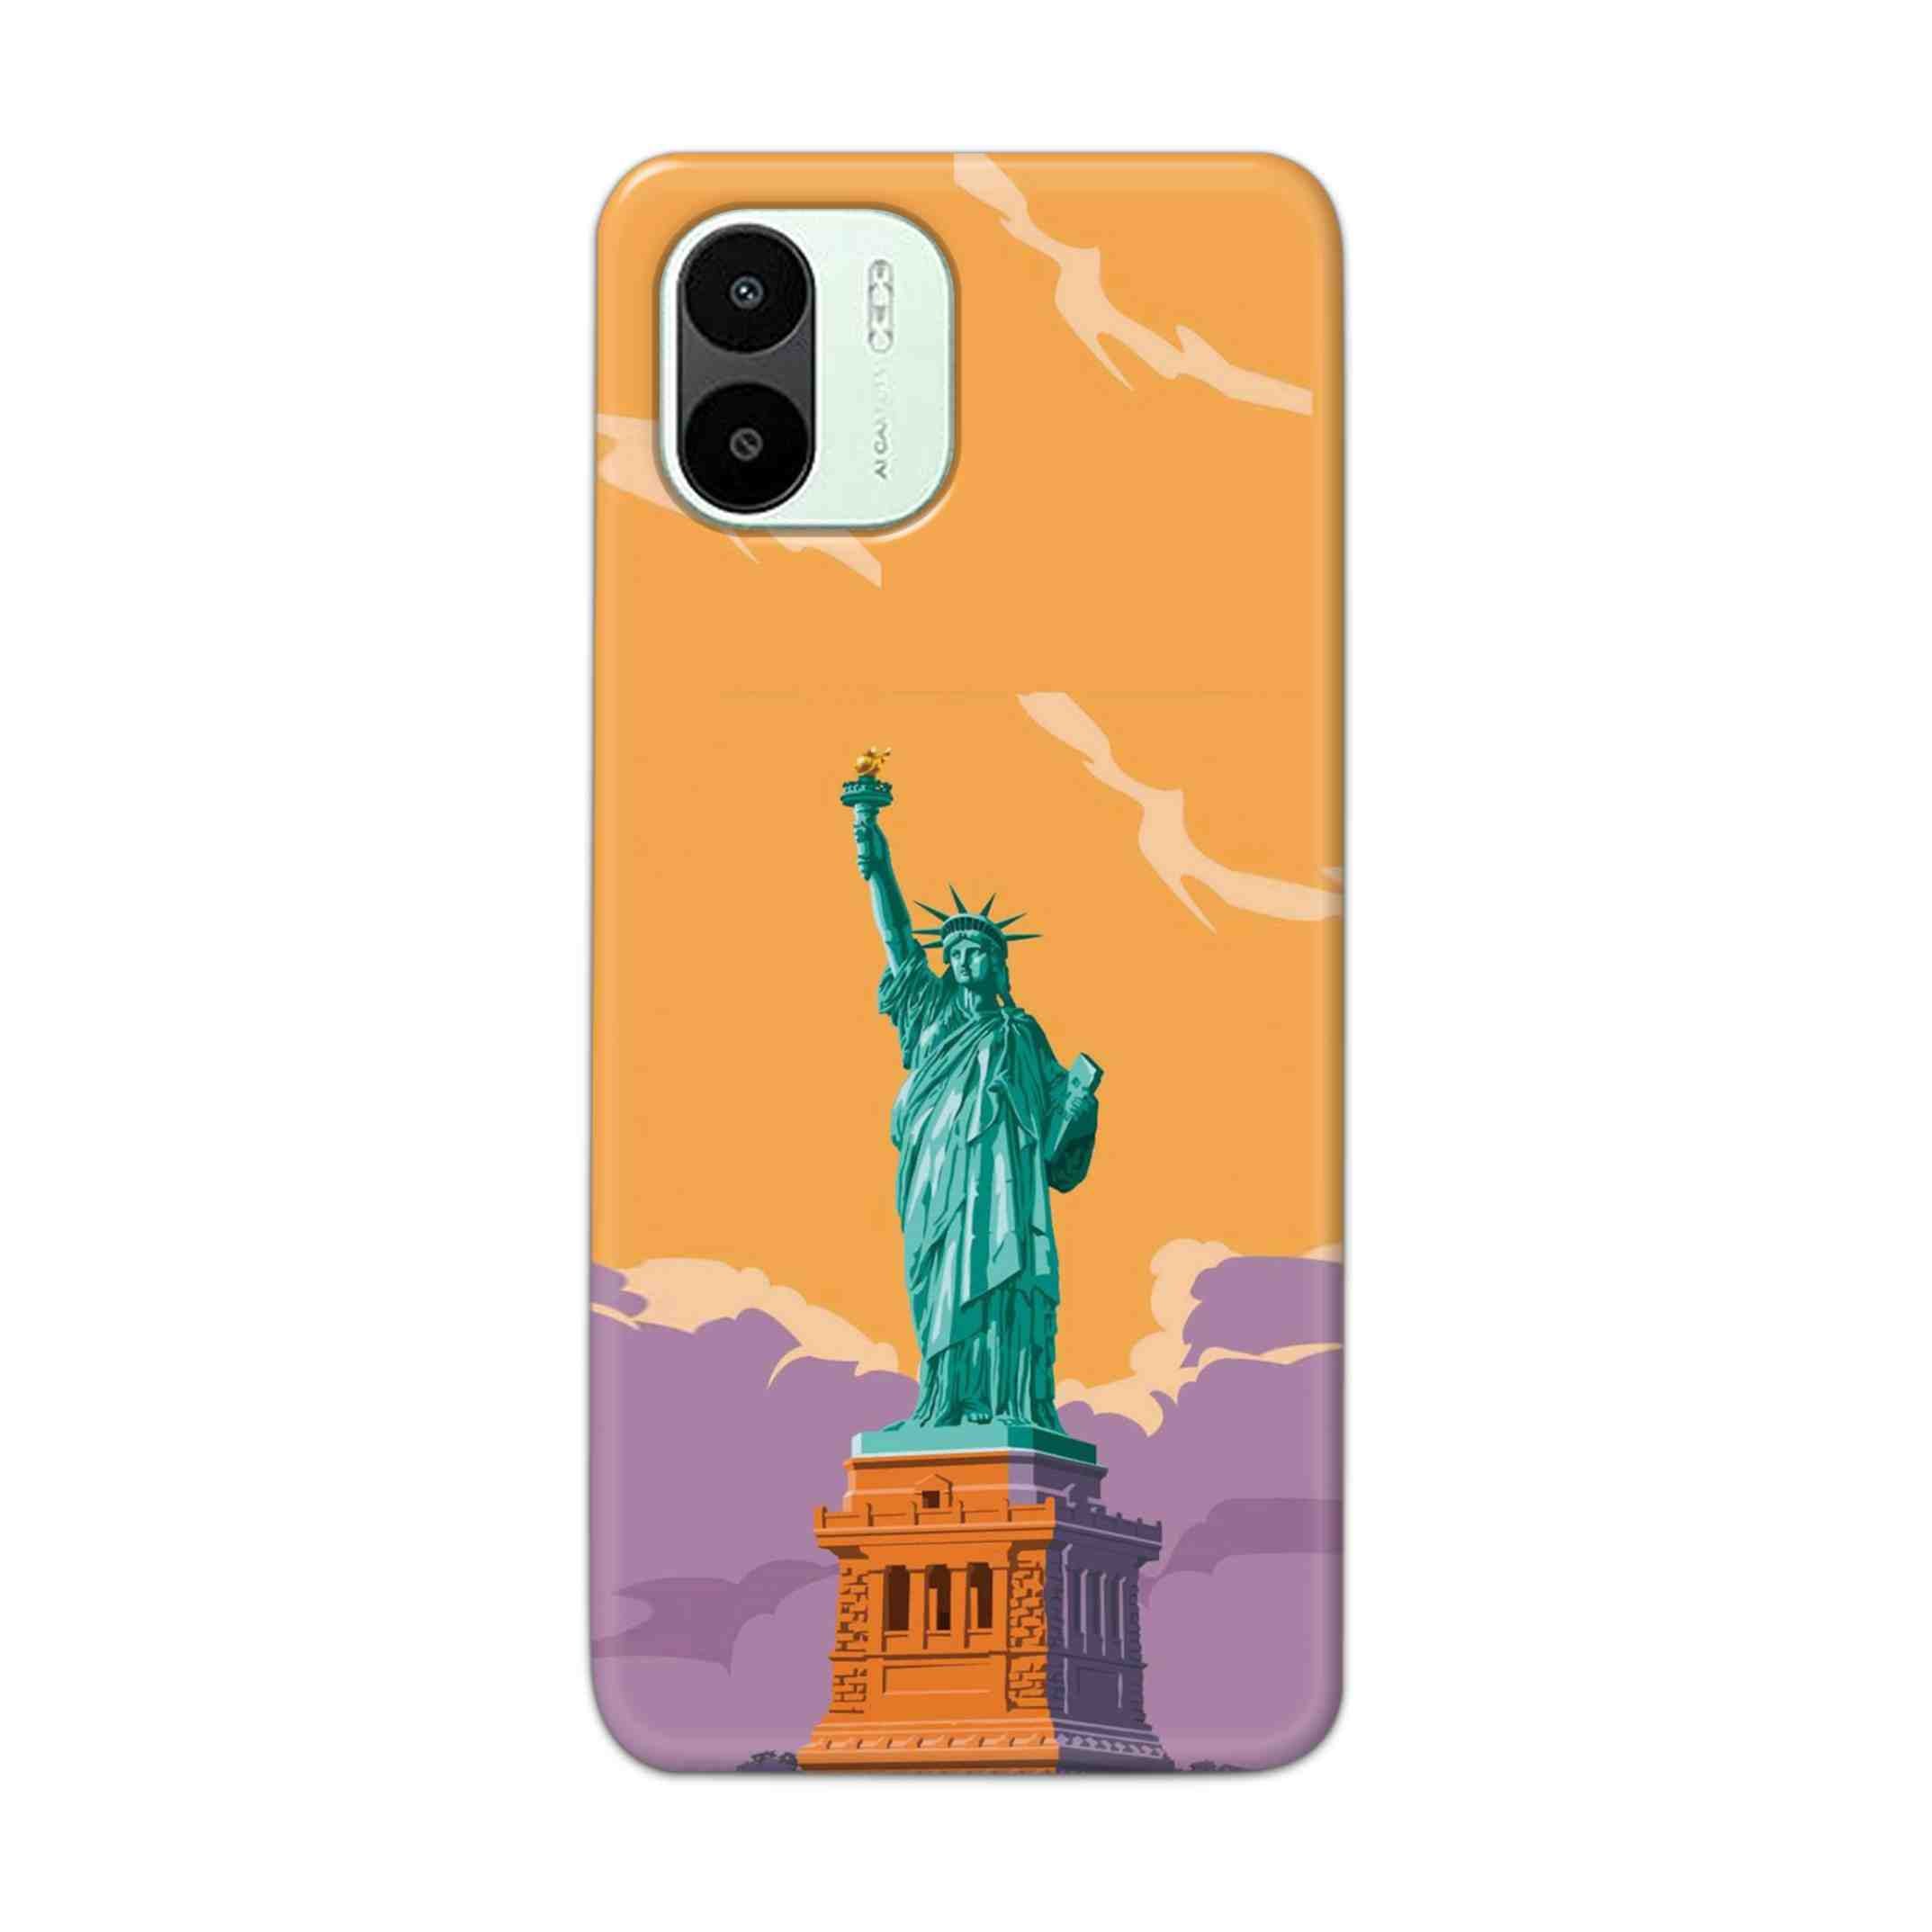 Buy Statue Of Liberty Hard Back Mobile Phone Case Cover For Xiaomi Redmi A1 5G Online